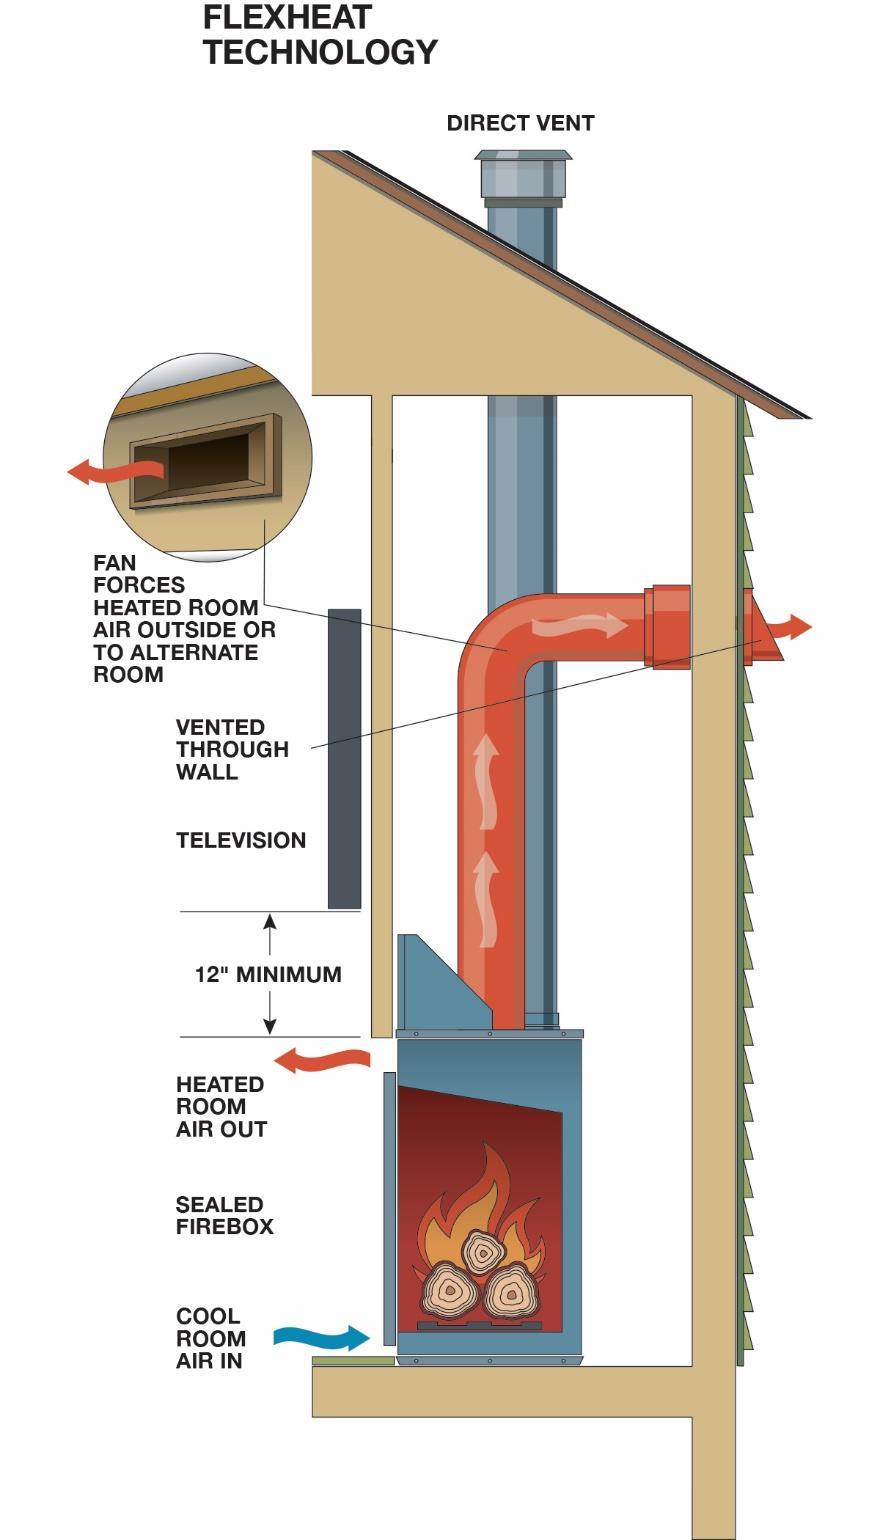 3.3.16.3.3 FlexHeat The FlexHeat system uses two inline fans to redirect heat from the fireplace outside the home or to an alternate room in the home.